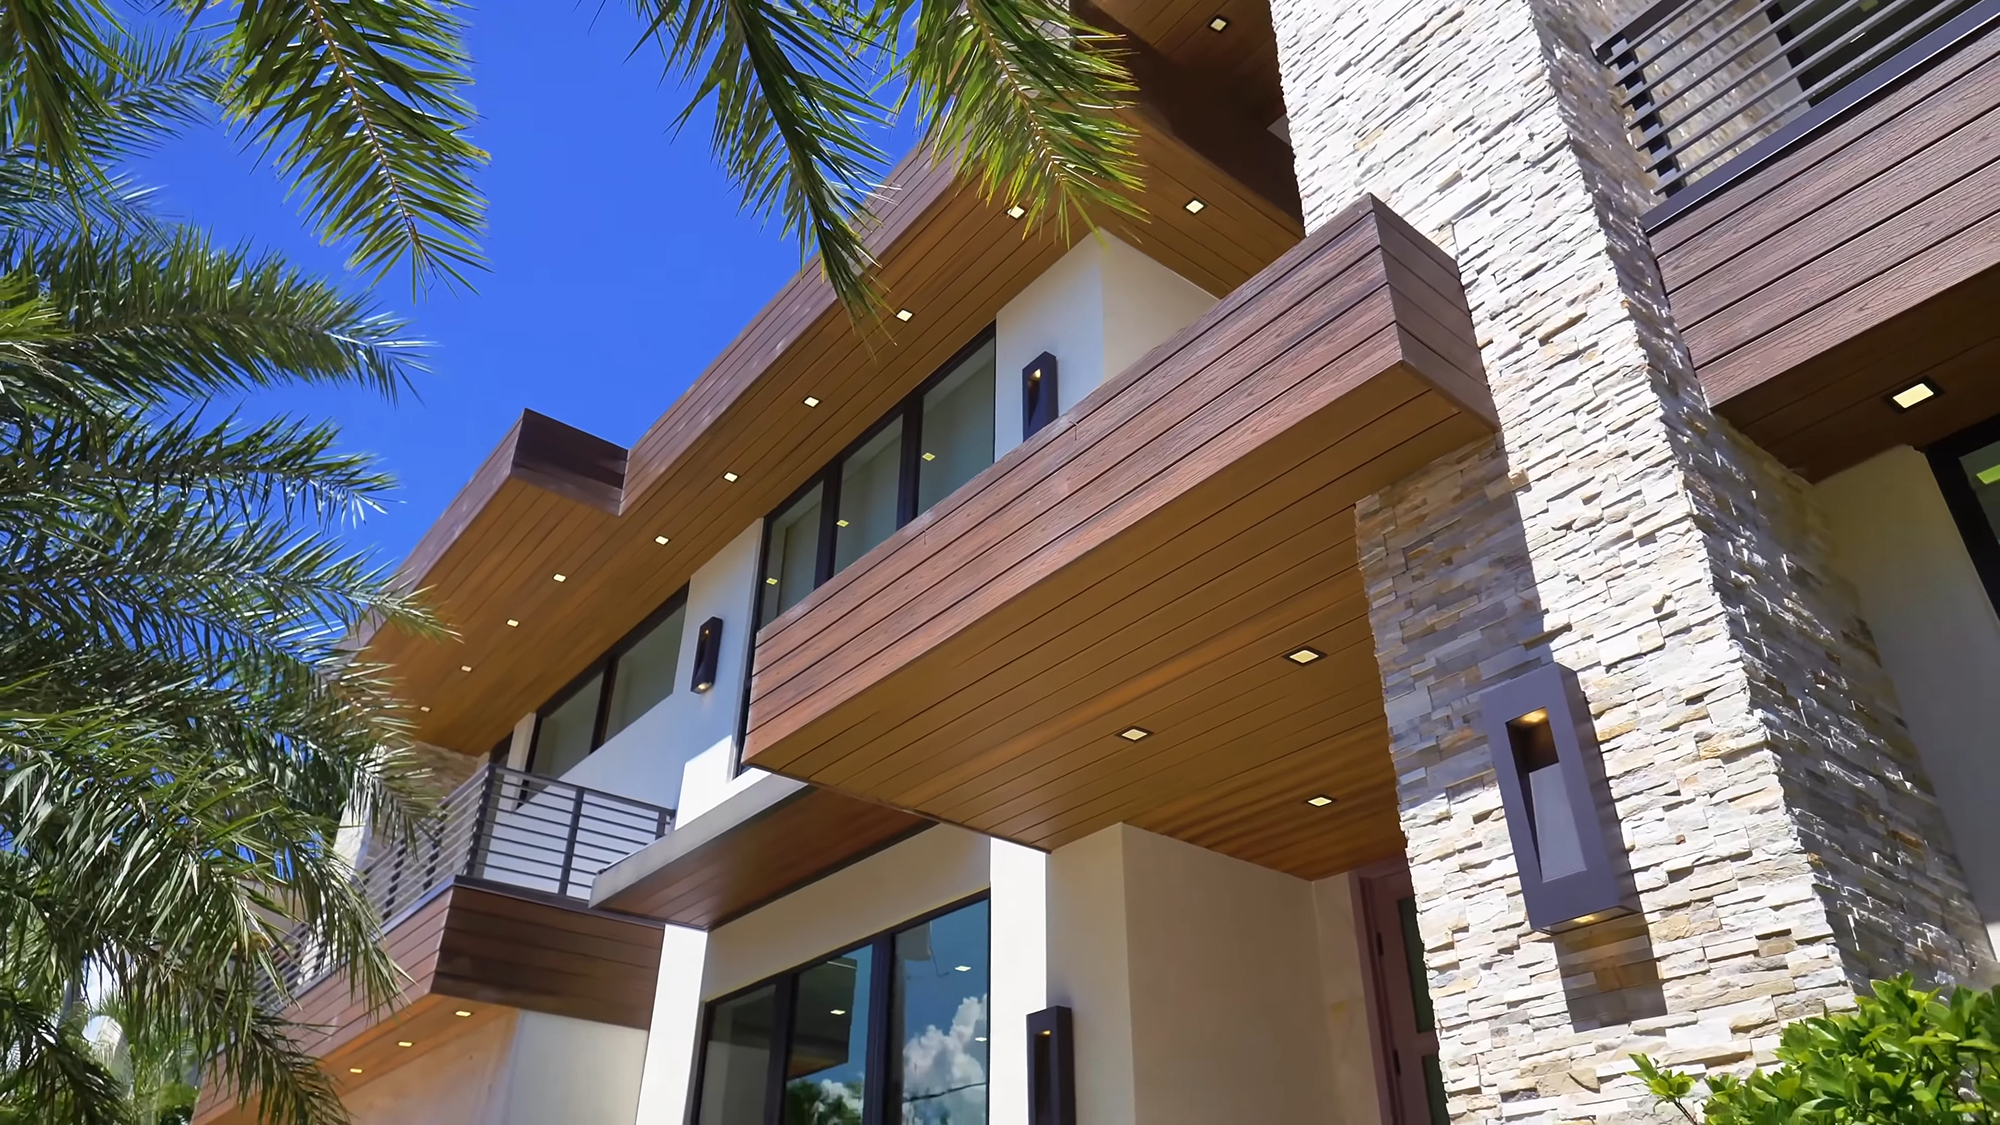 Ground level view of Trex decking soffits and recessed LED lighting.